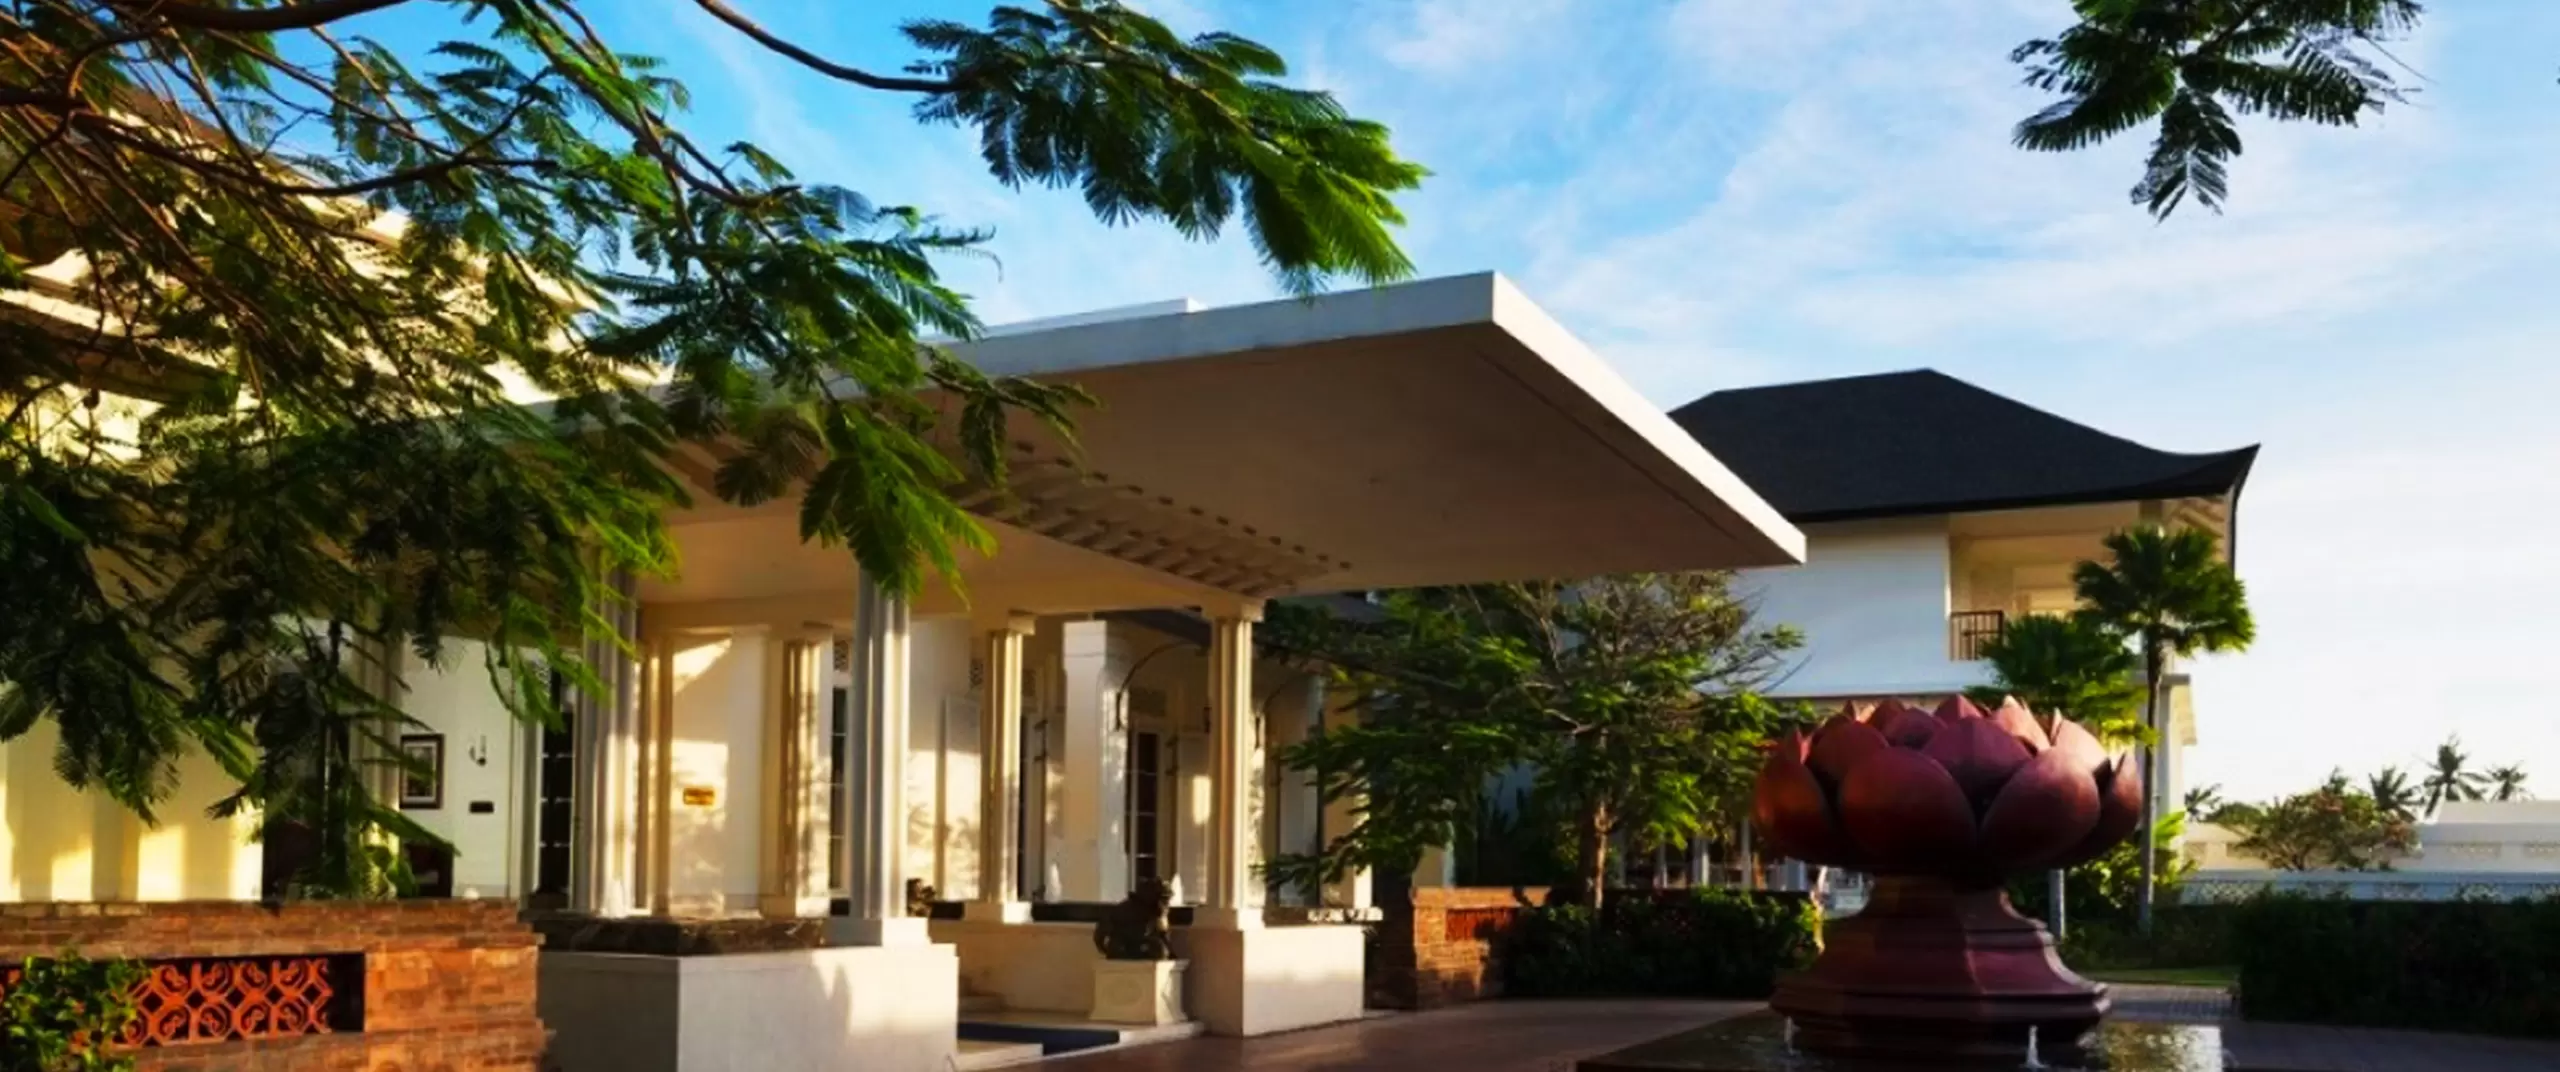 Rumah Luwih Special Offer - Wellness Package Minimum for 2 nights stay